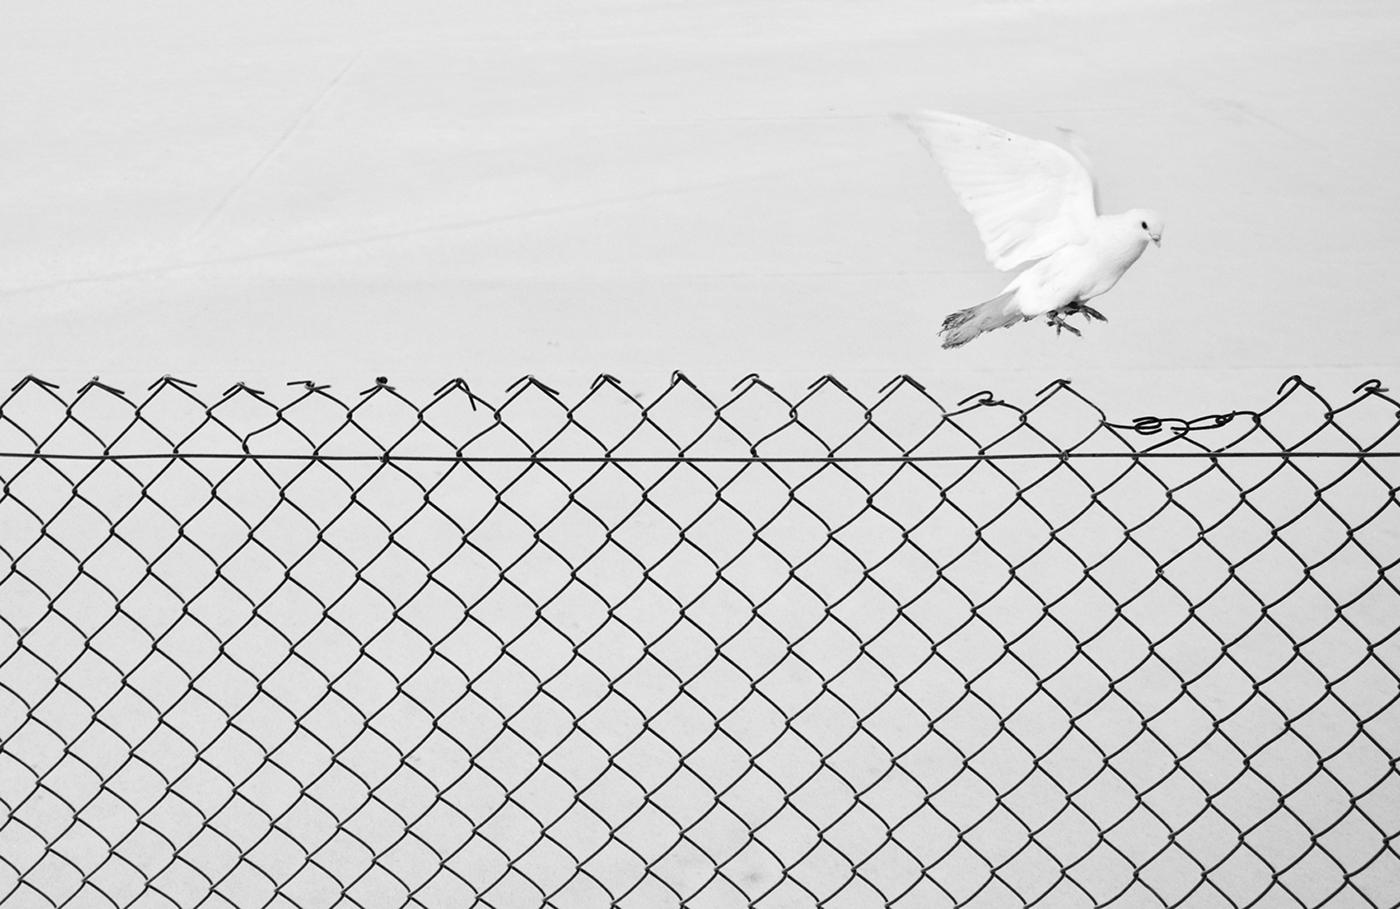 Liberation - Contemporary Minimalist Street Photography, Black And White